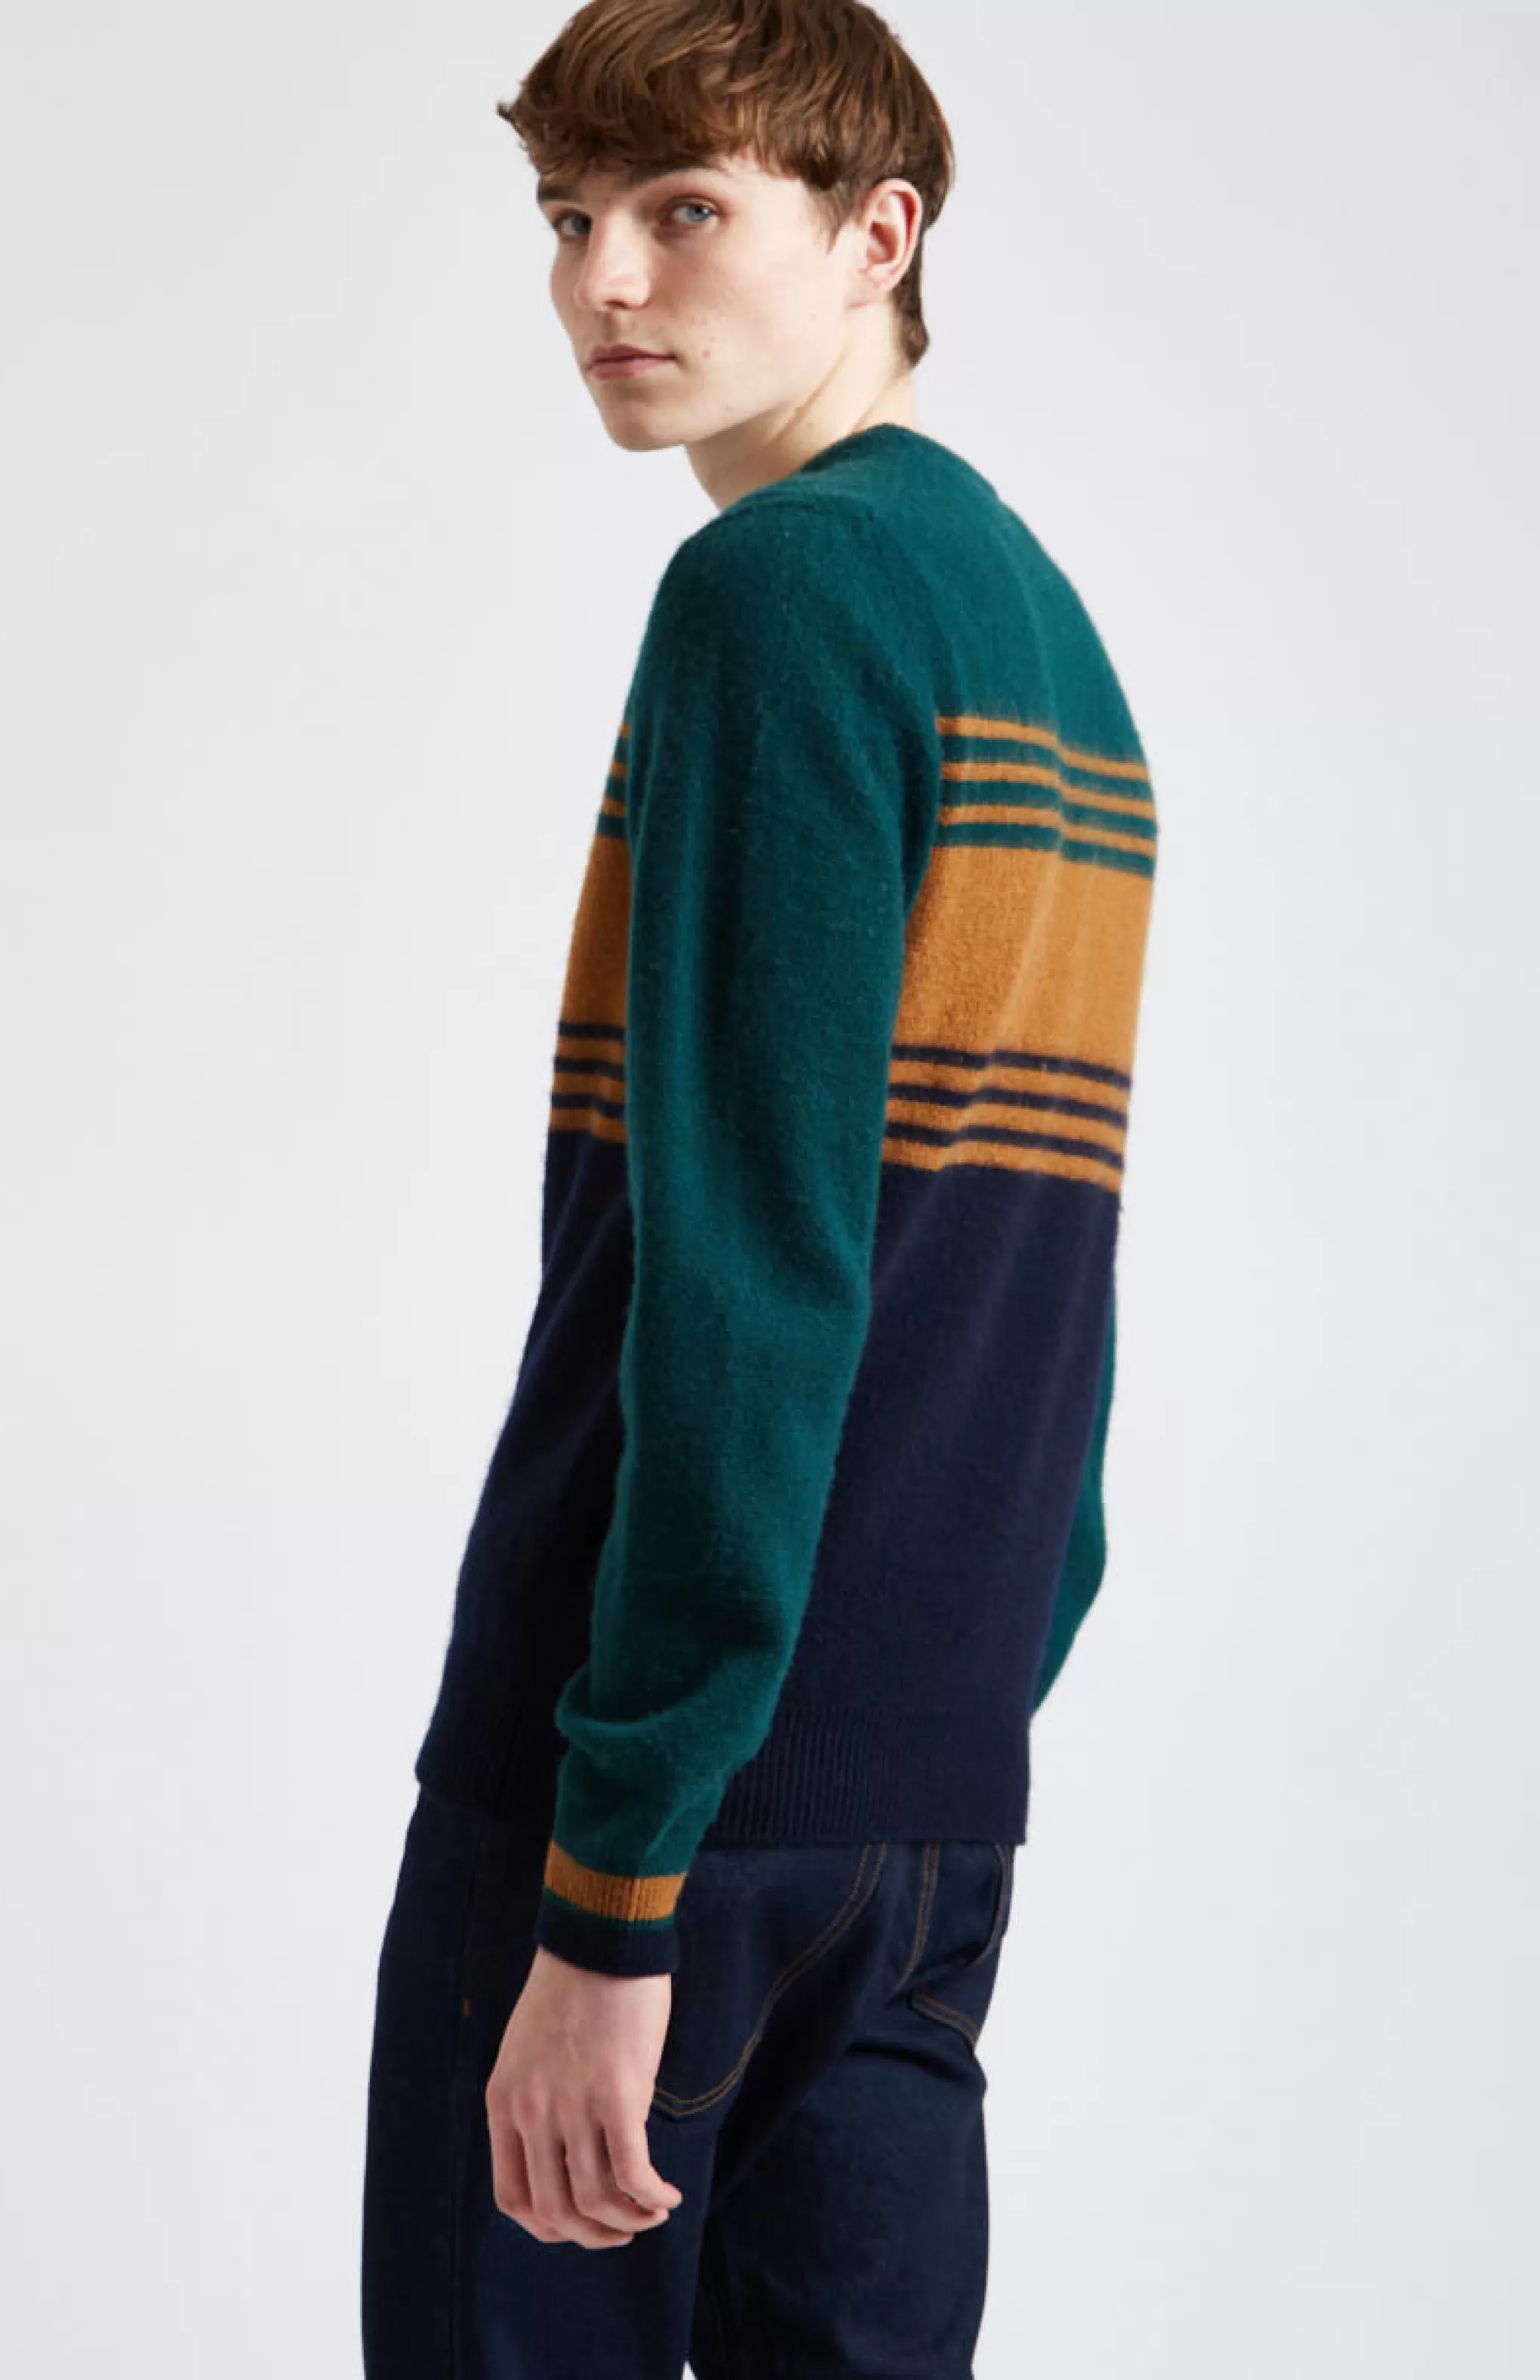 Best Sale Multicolour Stripe Round Neck Brushed Lambswool Jumper Men Made in Scotland